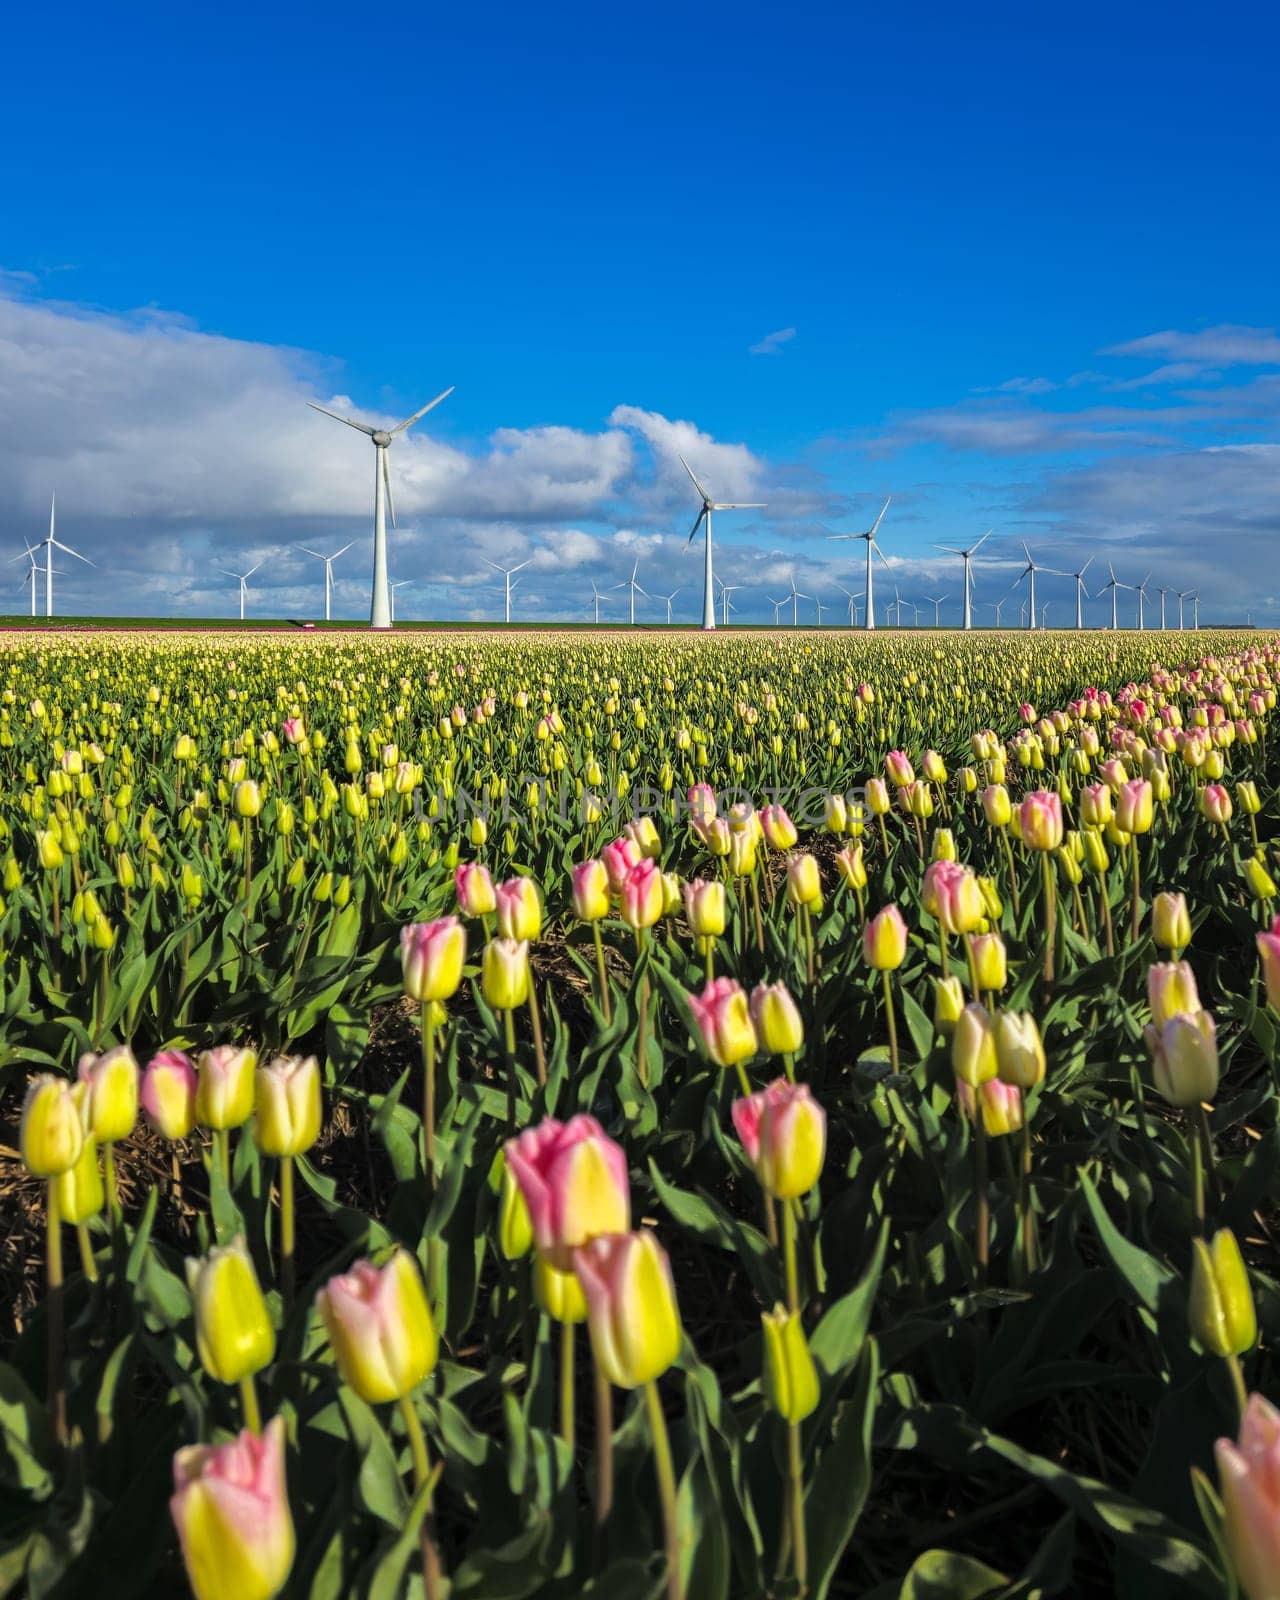 A field of budding tulips with towering windmills against a clear blue sky in the Noordoostpolder Netherlands